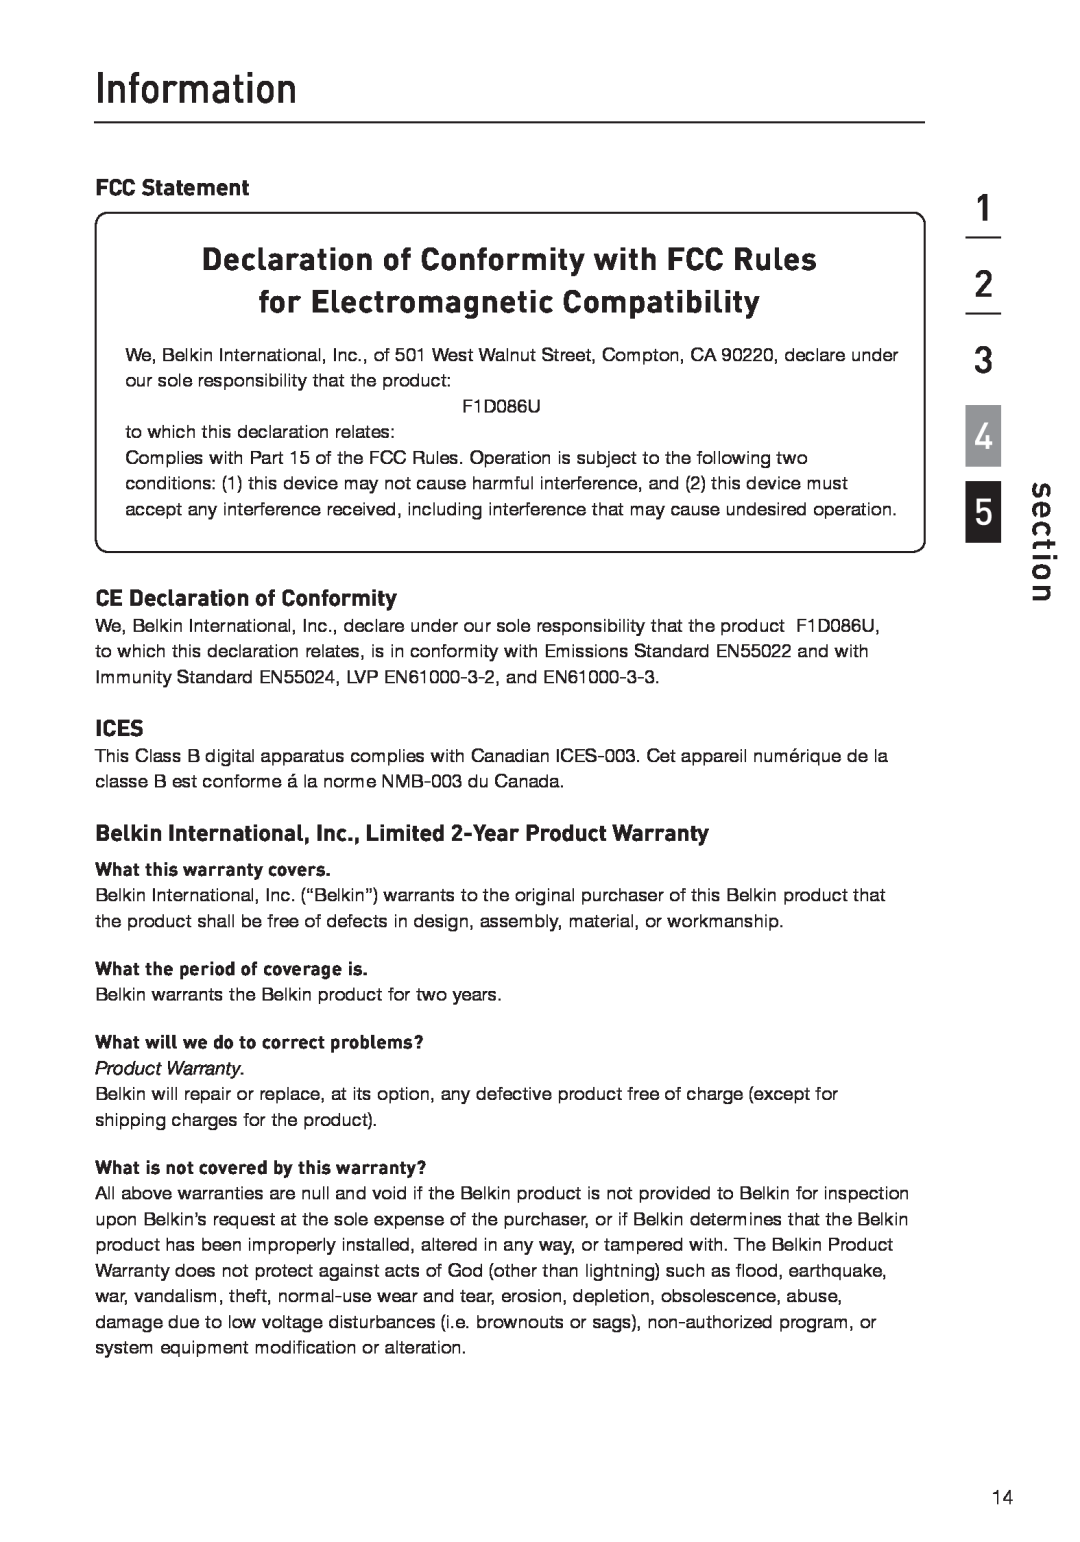 Belkin P75472-A Information, Declaration of Conformity with FCC Rules, for Electromagnetic Compatibility, section, Ices 